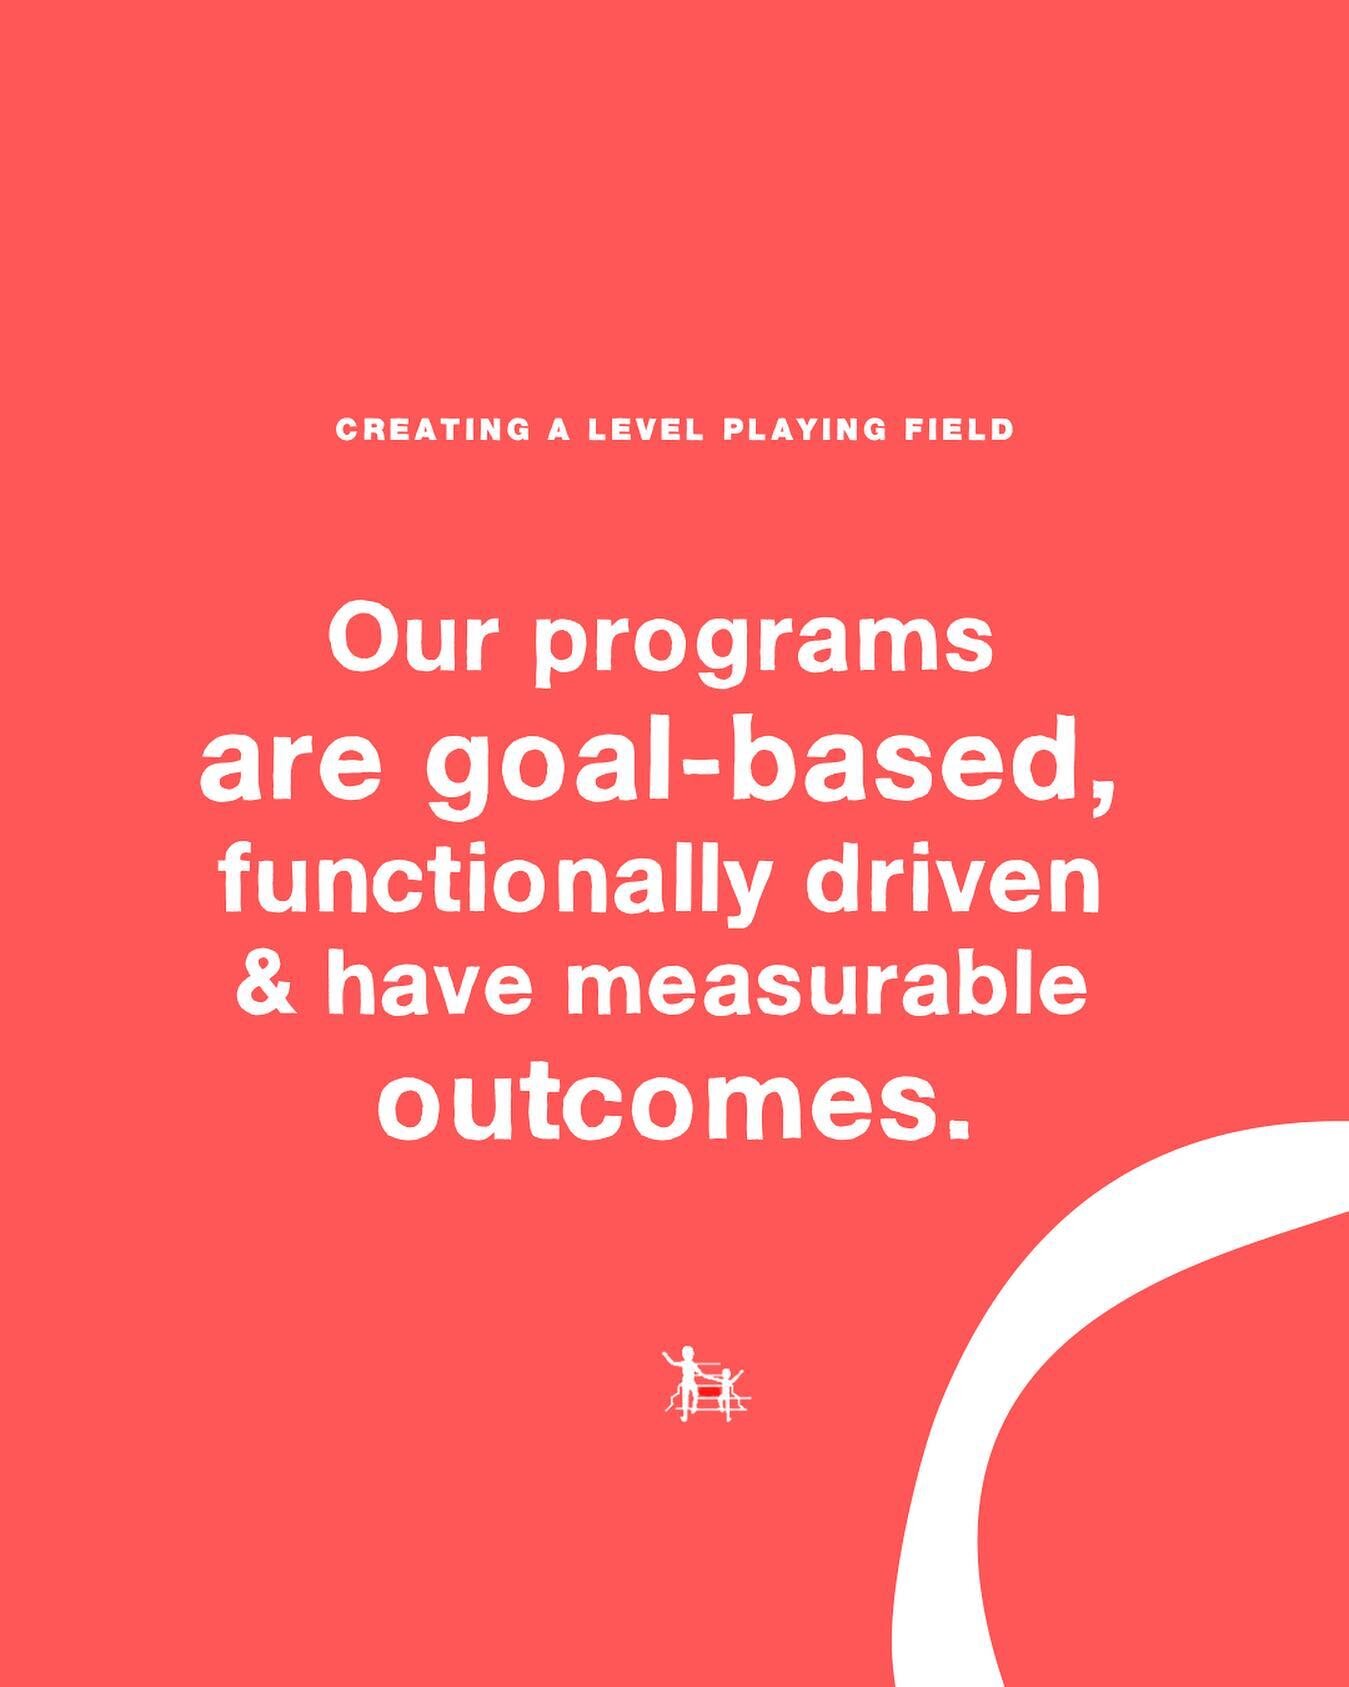 We design all our programs around identifiable needs of the individual involved, &amp; tailor them in consultation with other health, education and community services.

❣️

Image description 1:
In white text over pale red background: &ldquo;Our progr